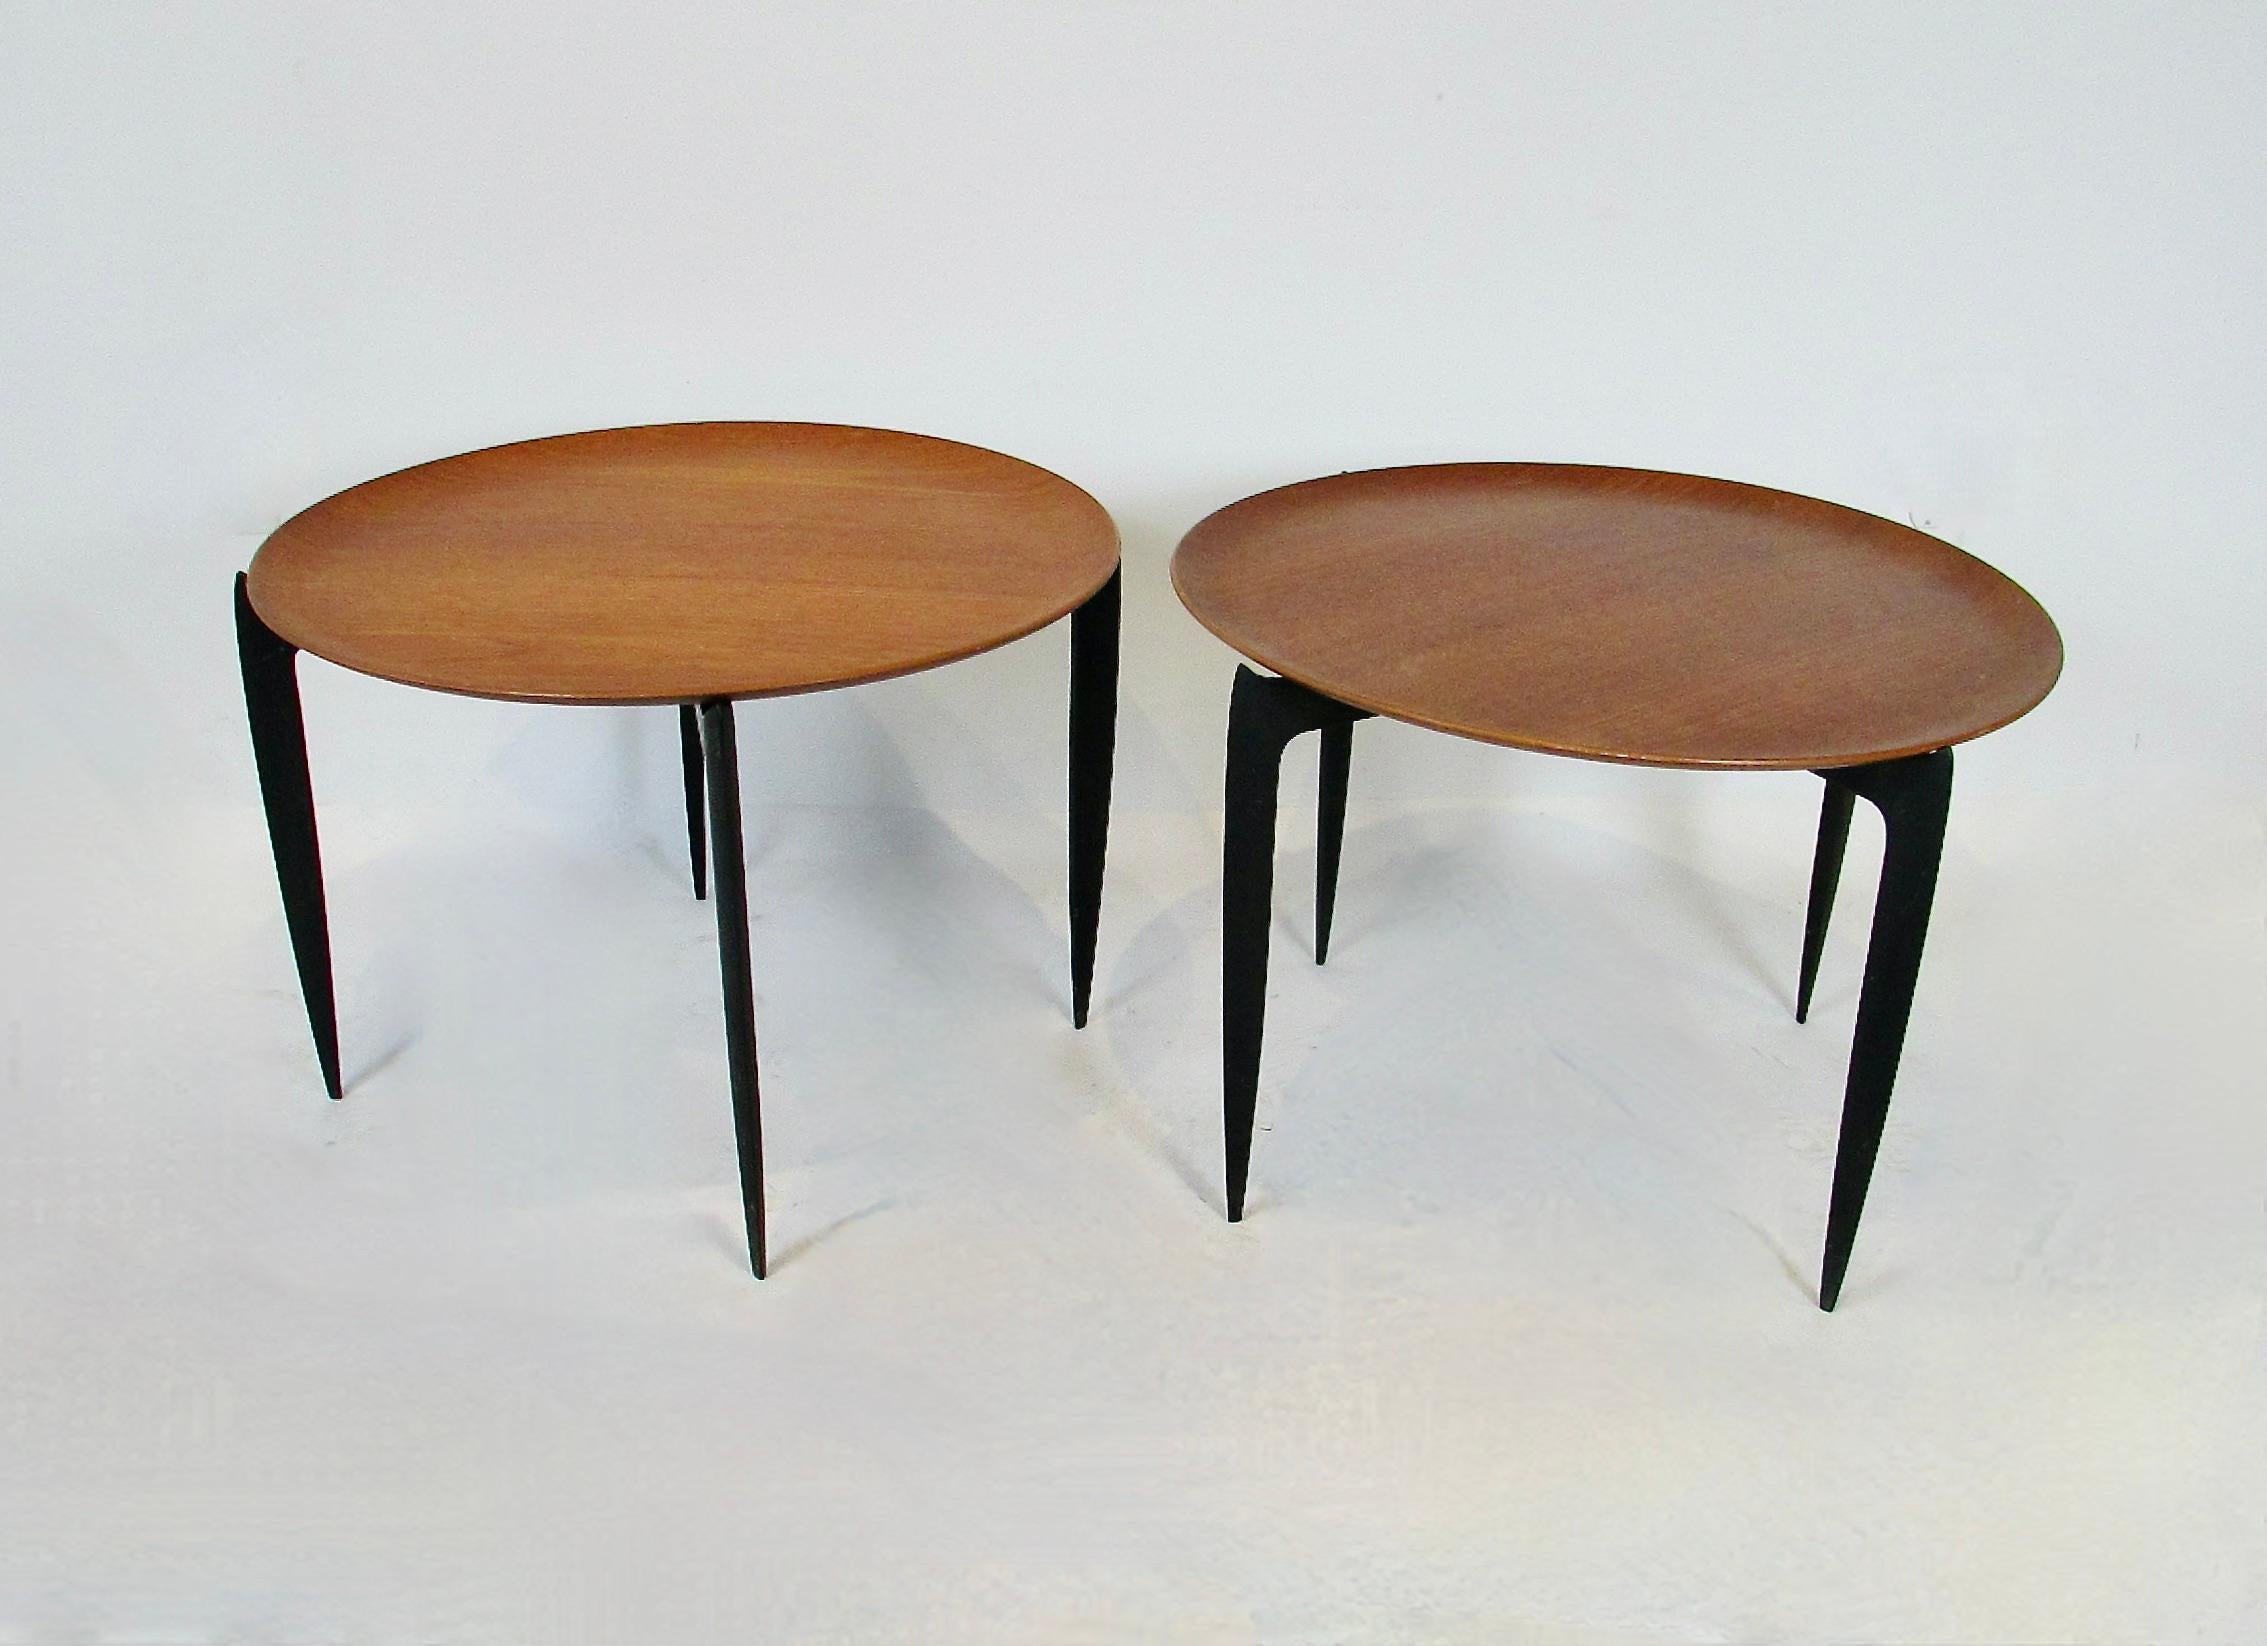 Pair of Danish teak tray tables (Model 4508) designed  by Svend Åge Willumsen and Hans Engholm for Fritz Hansen in 1958 . Great representation of form and function,  both practical and nicely crafted while maintaining elegance in its minimalism